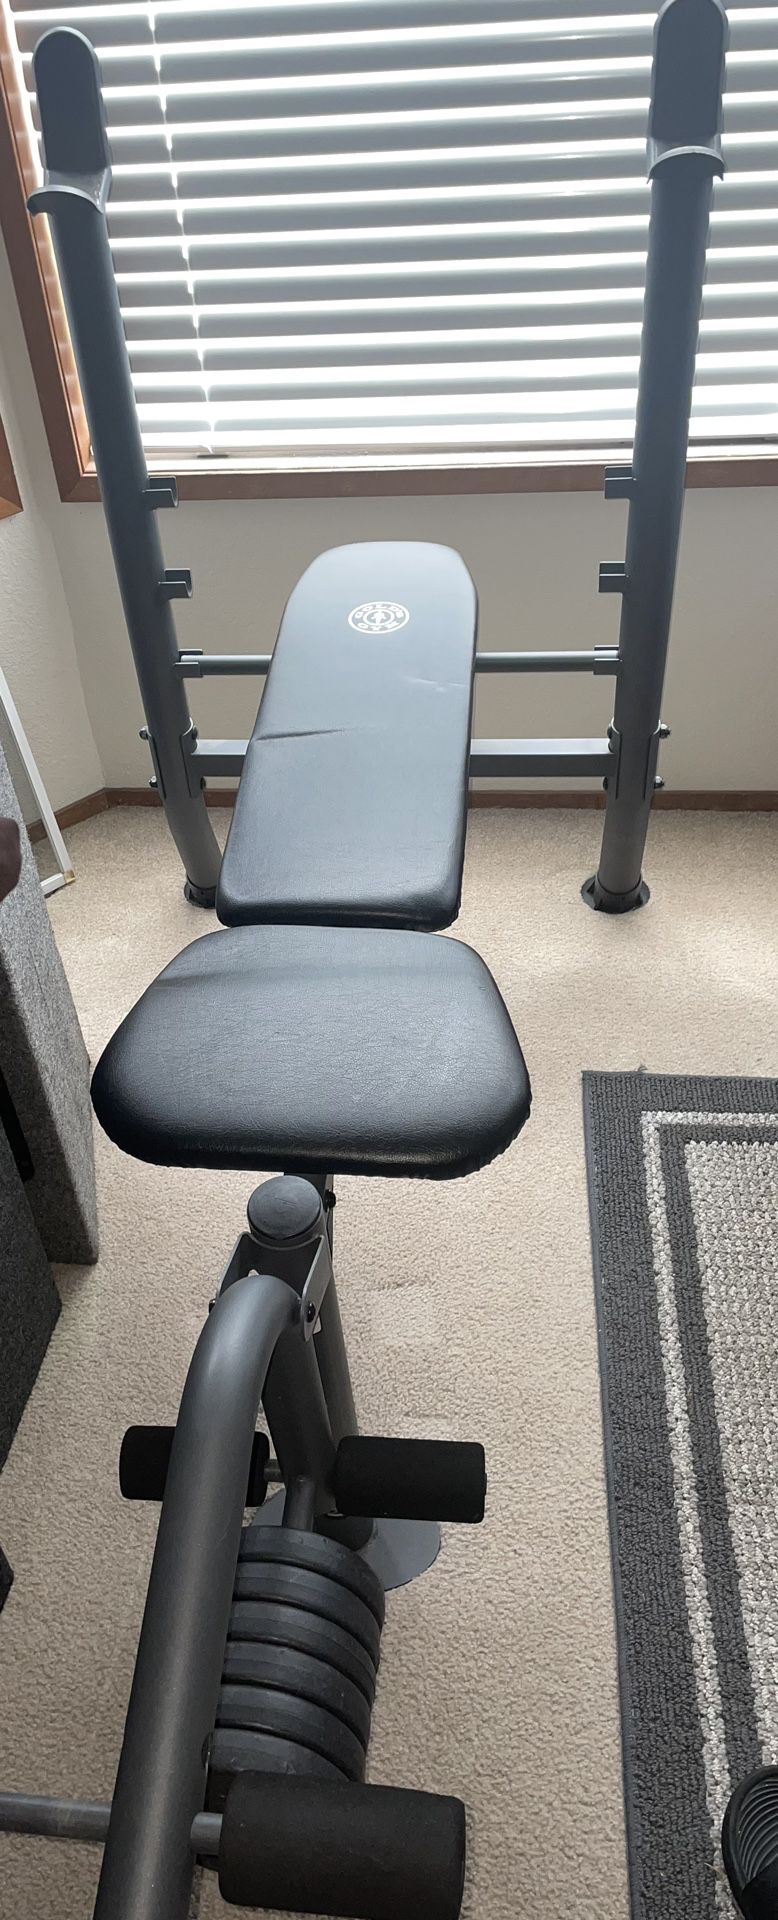 Golds Gym Weight Bench, Mint condition (FIRM ON PRICE)